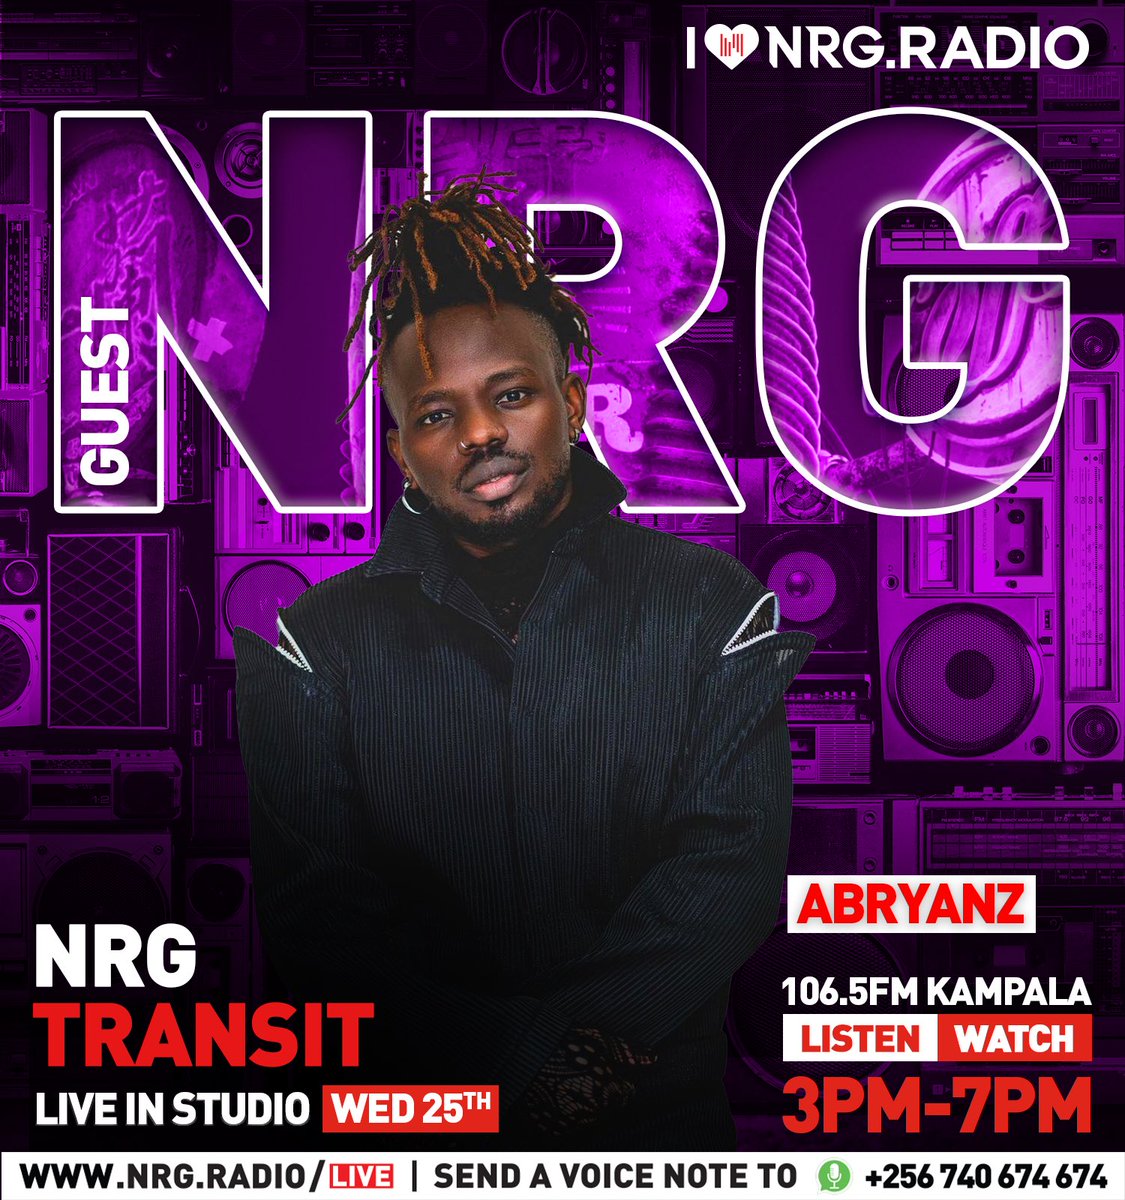 Tune in as @NRGRadioUganda hosts @AbryanzOfficial ahead of the Black Excellence event this Sunday. #10yearsofAbryanz